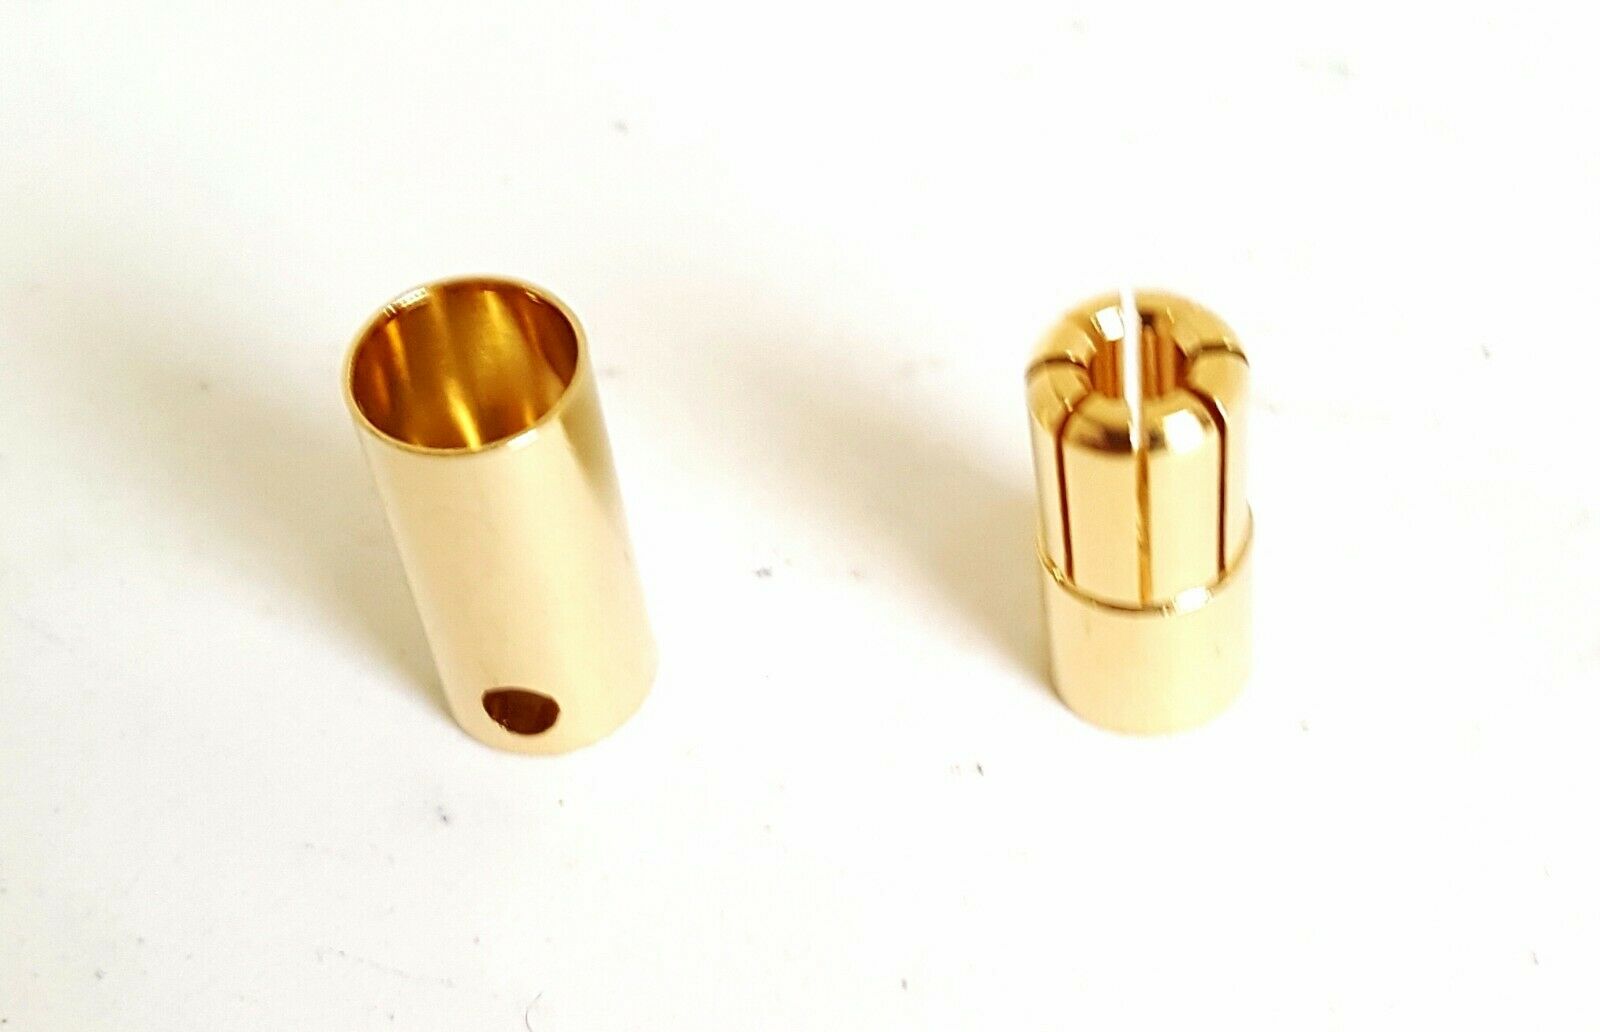 10Pair MALE/FEMALE 6.5mm BULLET CONNECTOR GOLD PLATED BANANA PLUG RC BATTERY,ESC